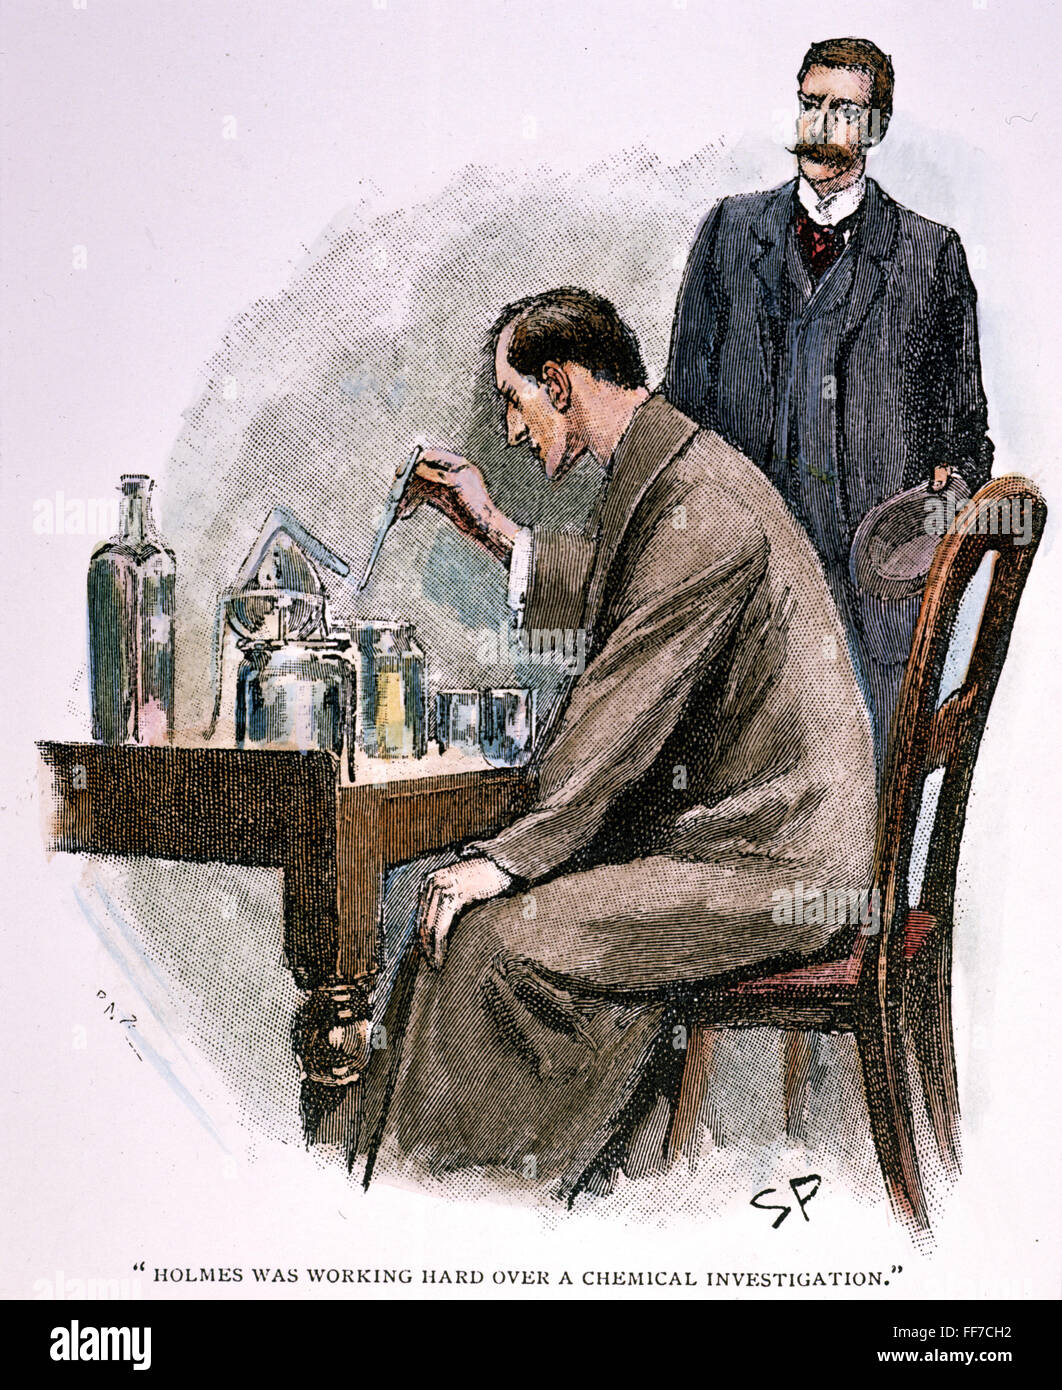 SHERLOCK HOLMES. /nDr. John Watson observing Sherlock Holmes working hard over a chemical investigation. Drawing by Sidney Paget for Arthur Conan Doyle's 'The Adventure of the Naval Treaty,' 1893. Stock Photo